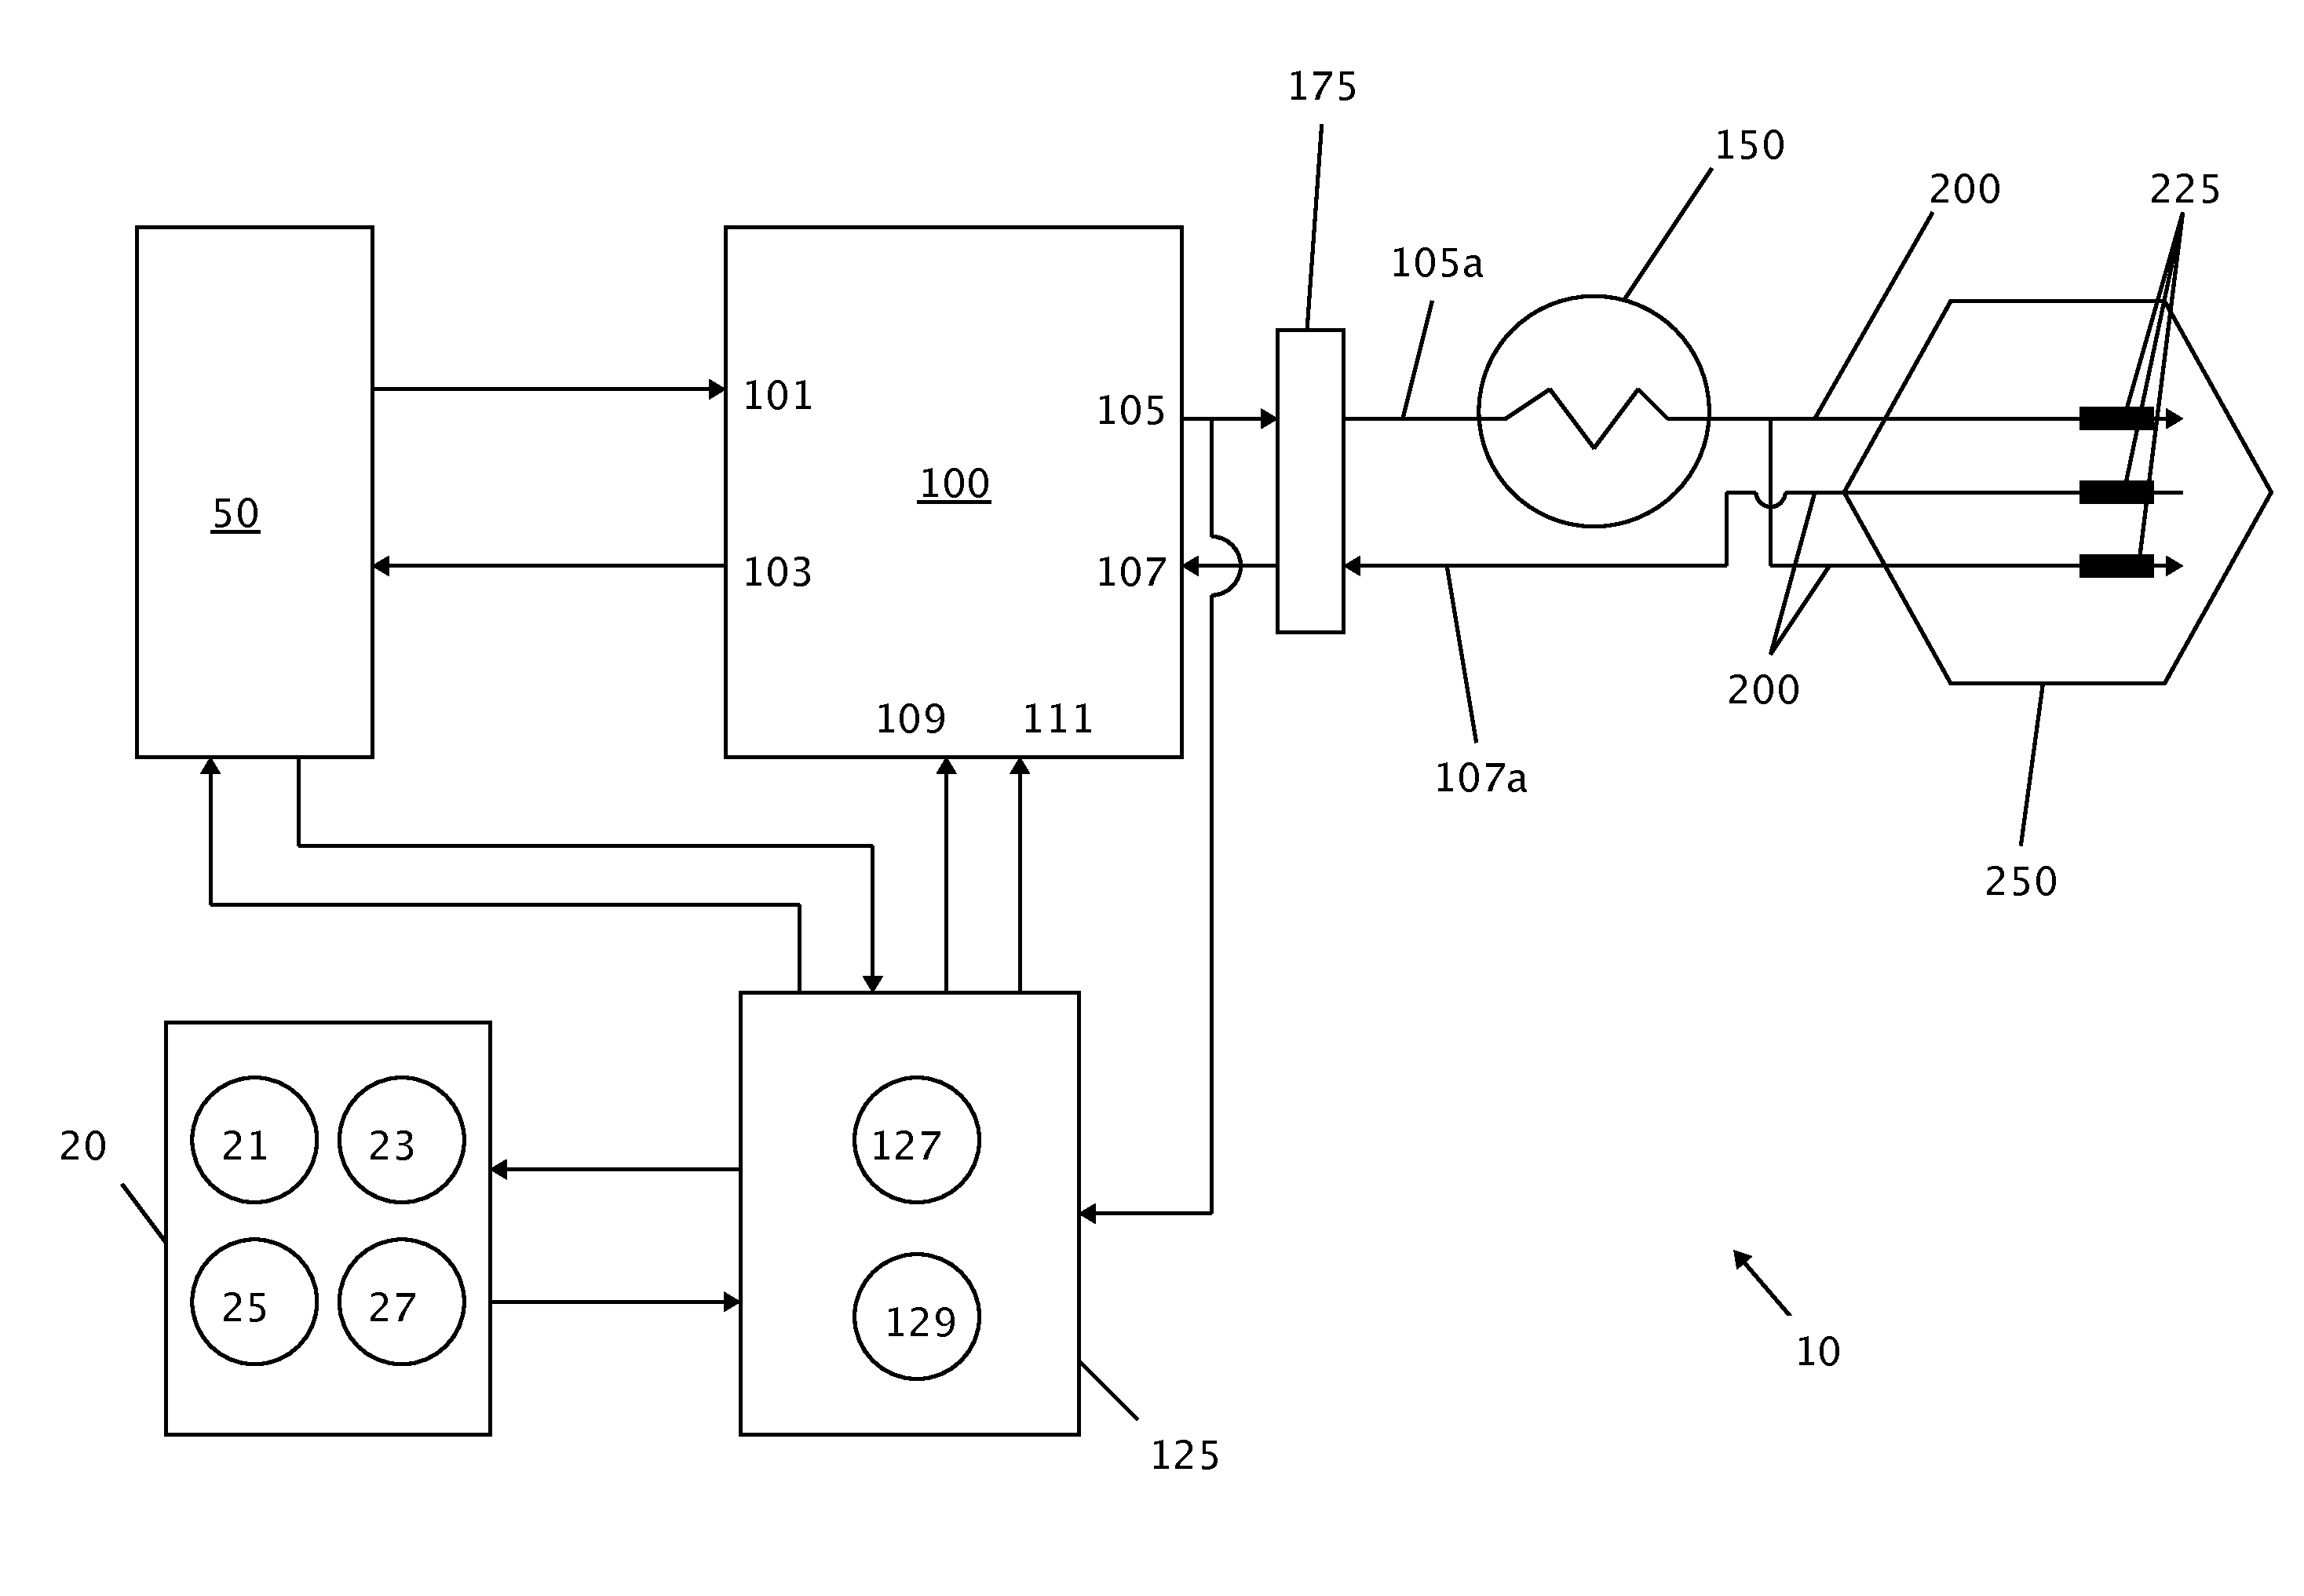 High frequency alternating current medical device with self-limiting conductive material and method